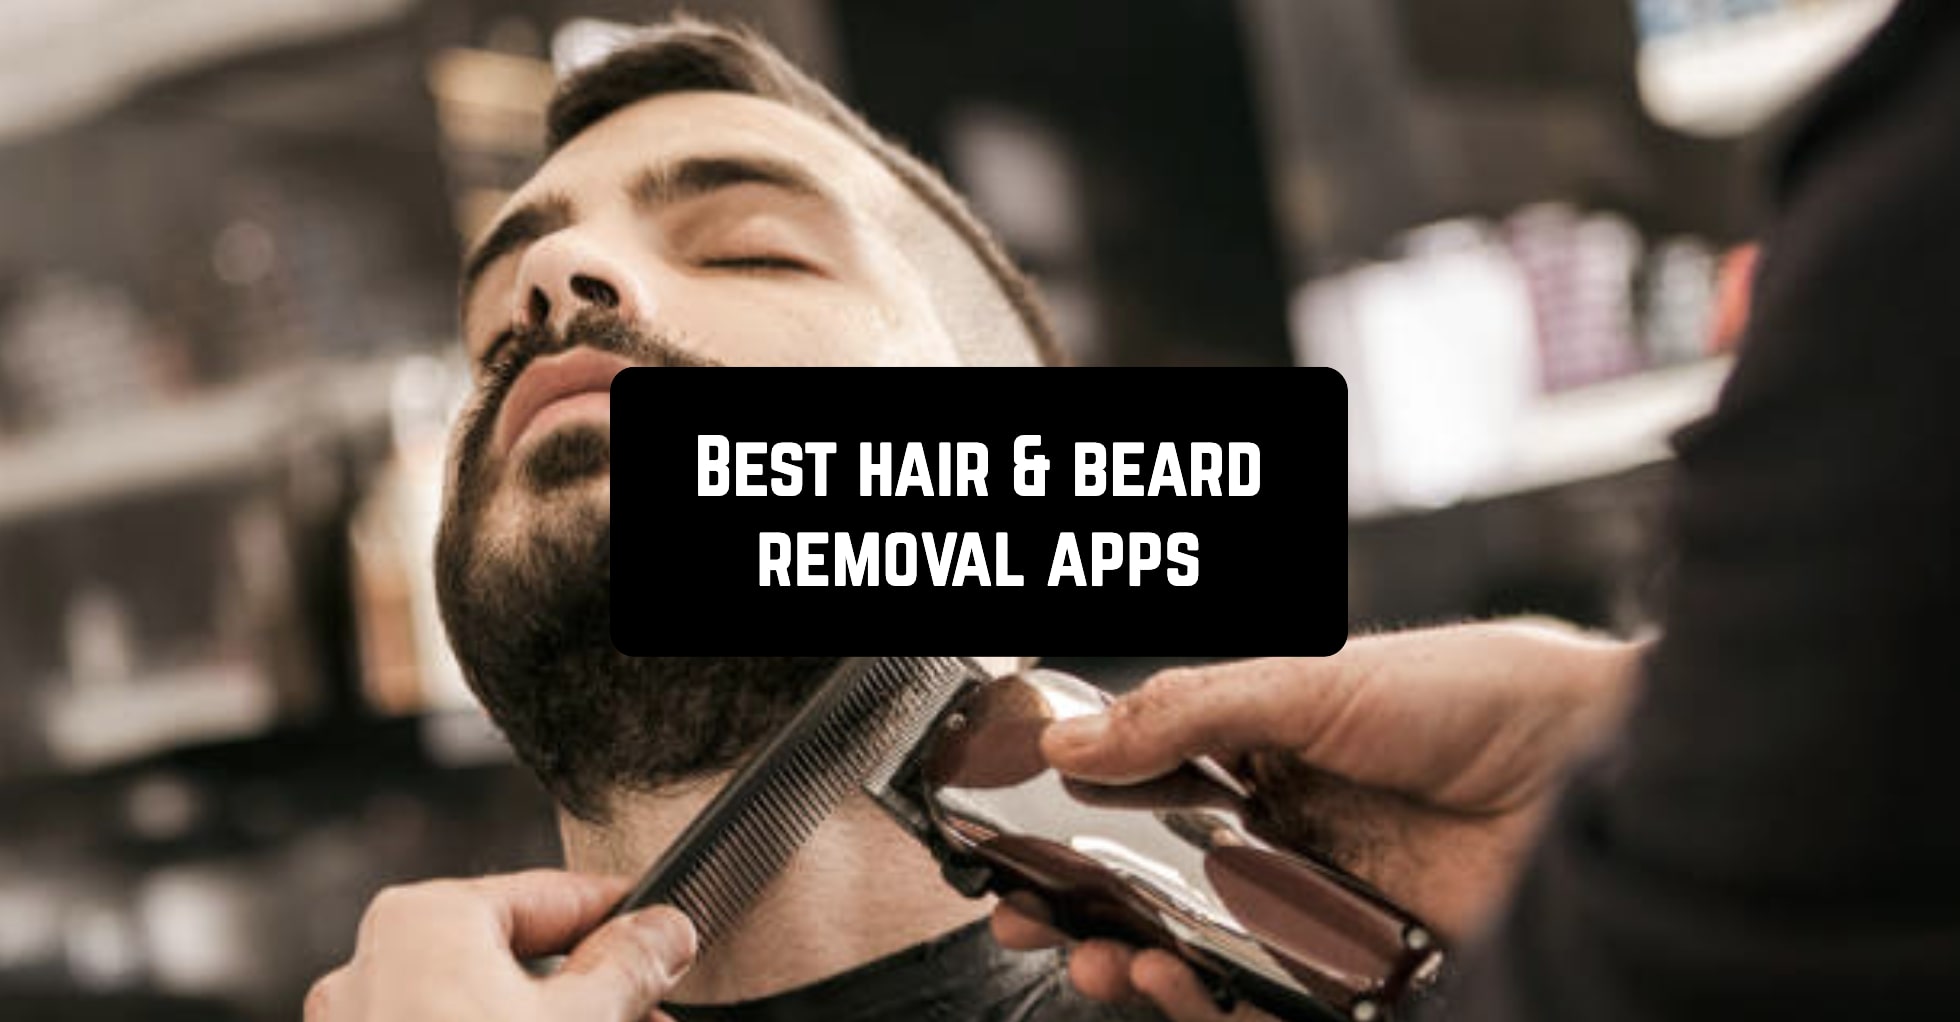 10 Best hair & beard removal apps for Android & iOS - App pearl - Best mobile apps for Android & iOS devices